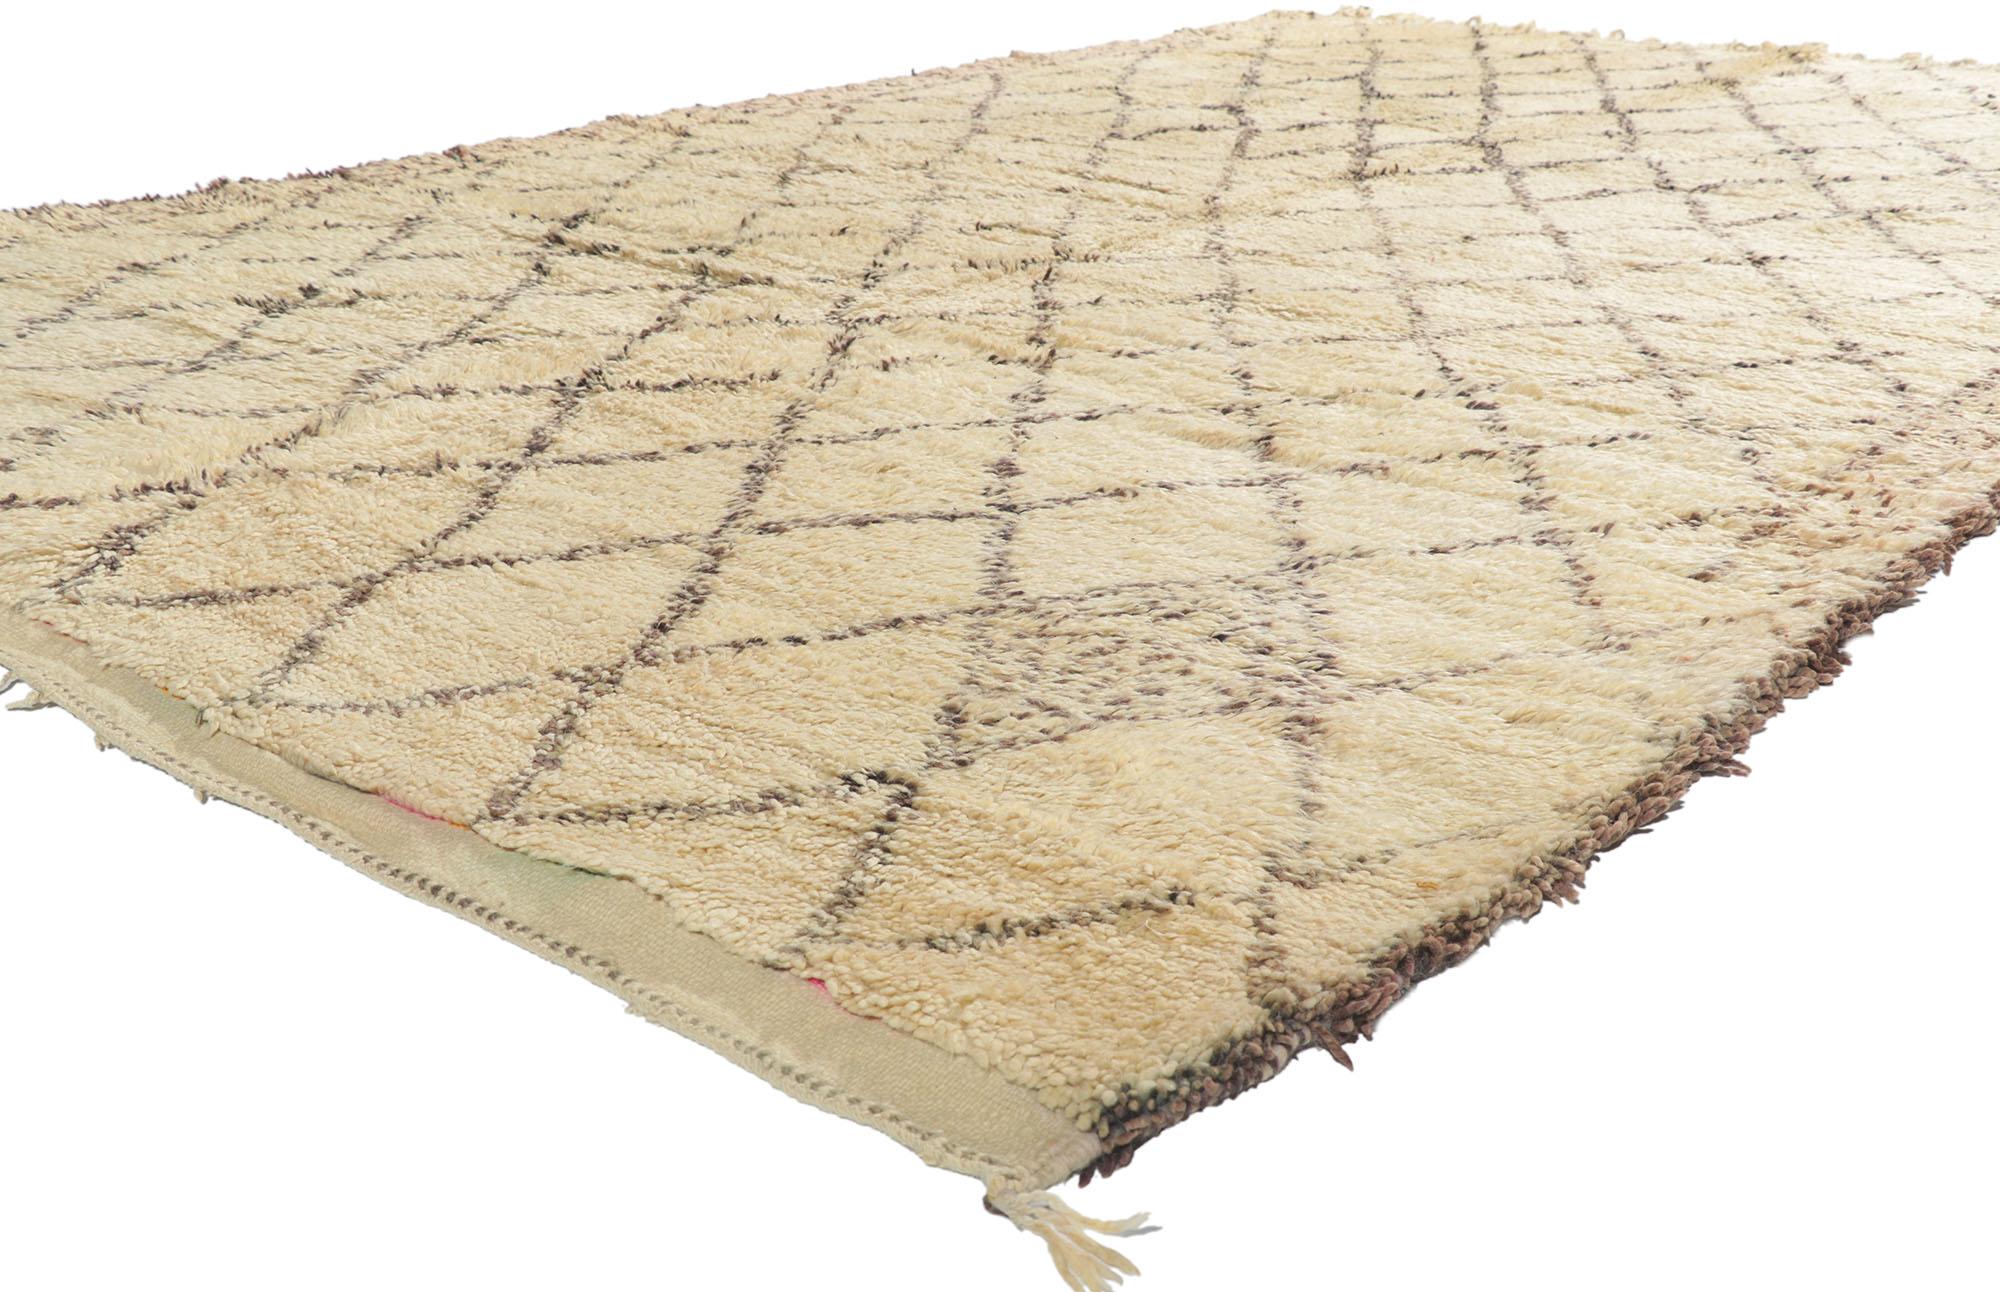 21408 Vintage Berber Moroccan Beni Ourain Rug 07'02 x 11'01. With its simplicity, plush pile and tribal style, this hand knotted wool vintage Berber Beni Ourain Moroccan rug is a captivating vision of woven beauty. It features a diamond lattice